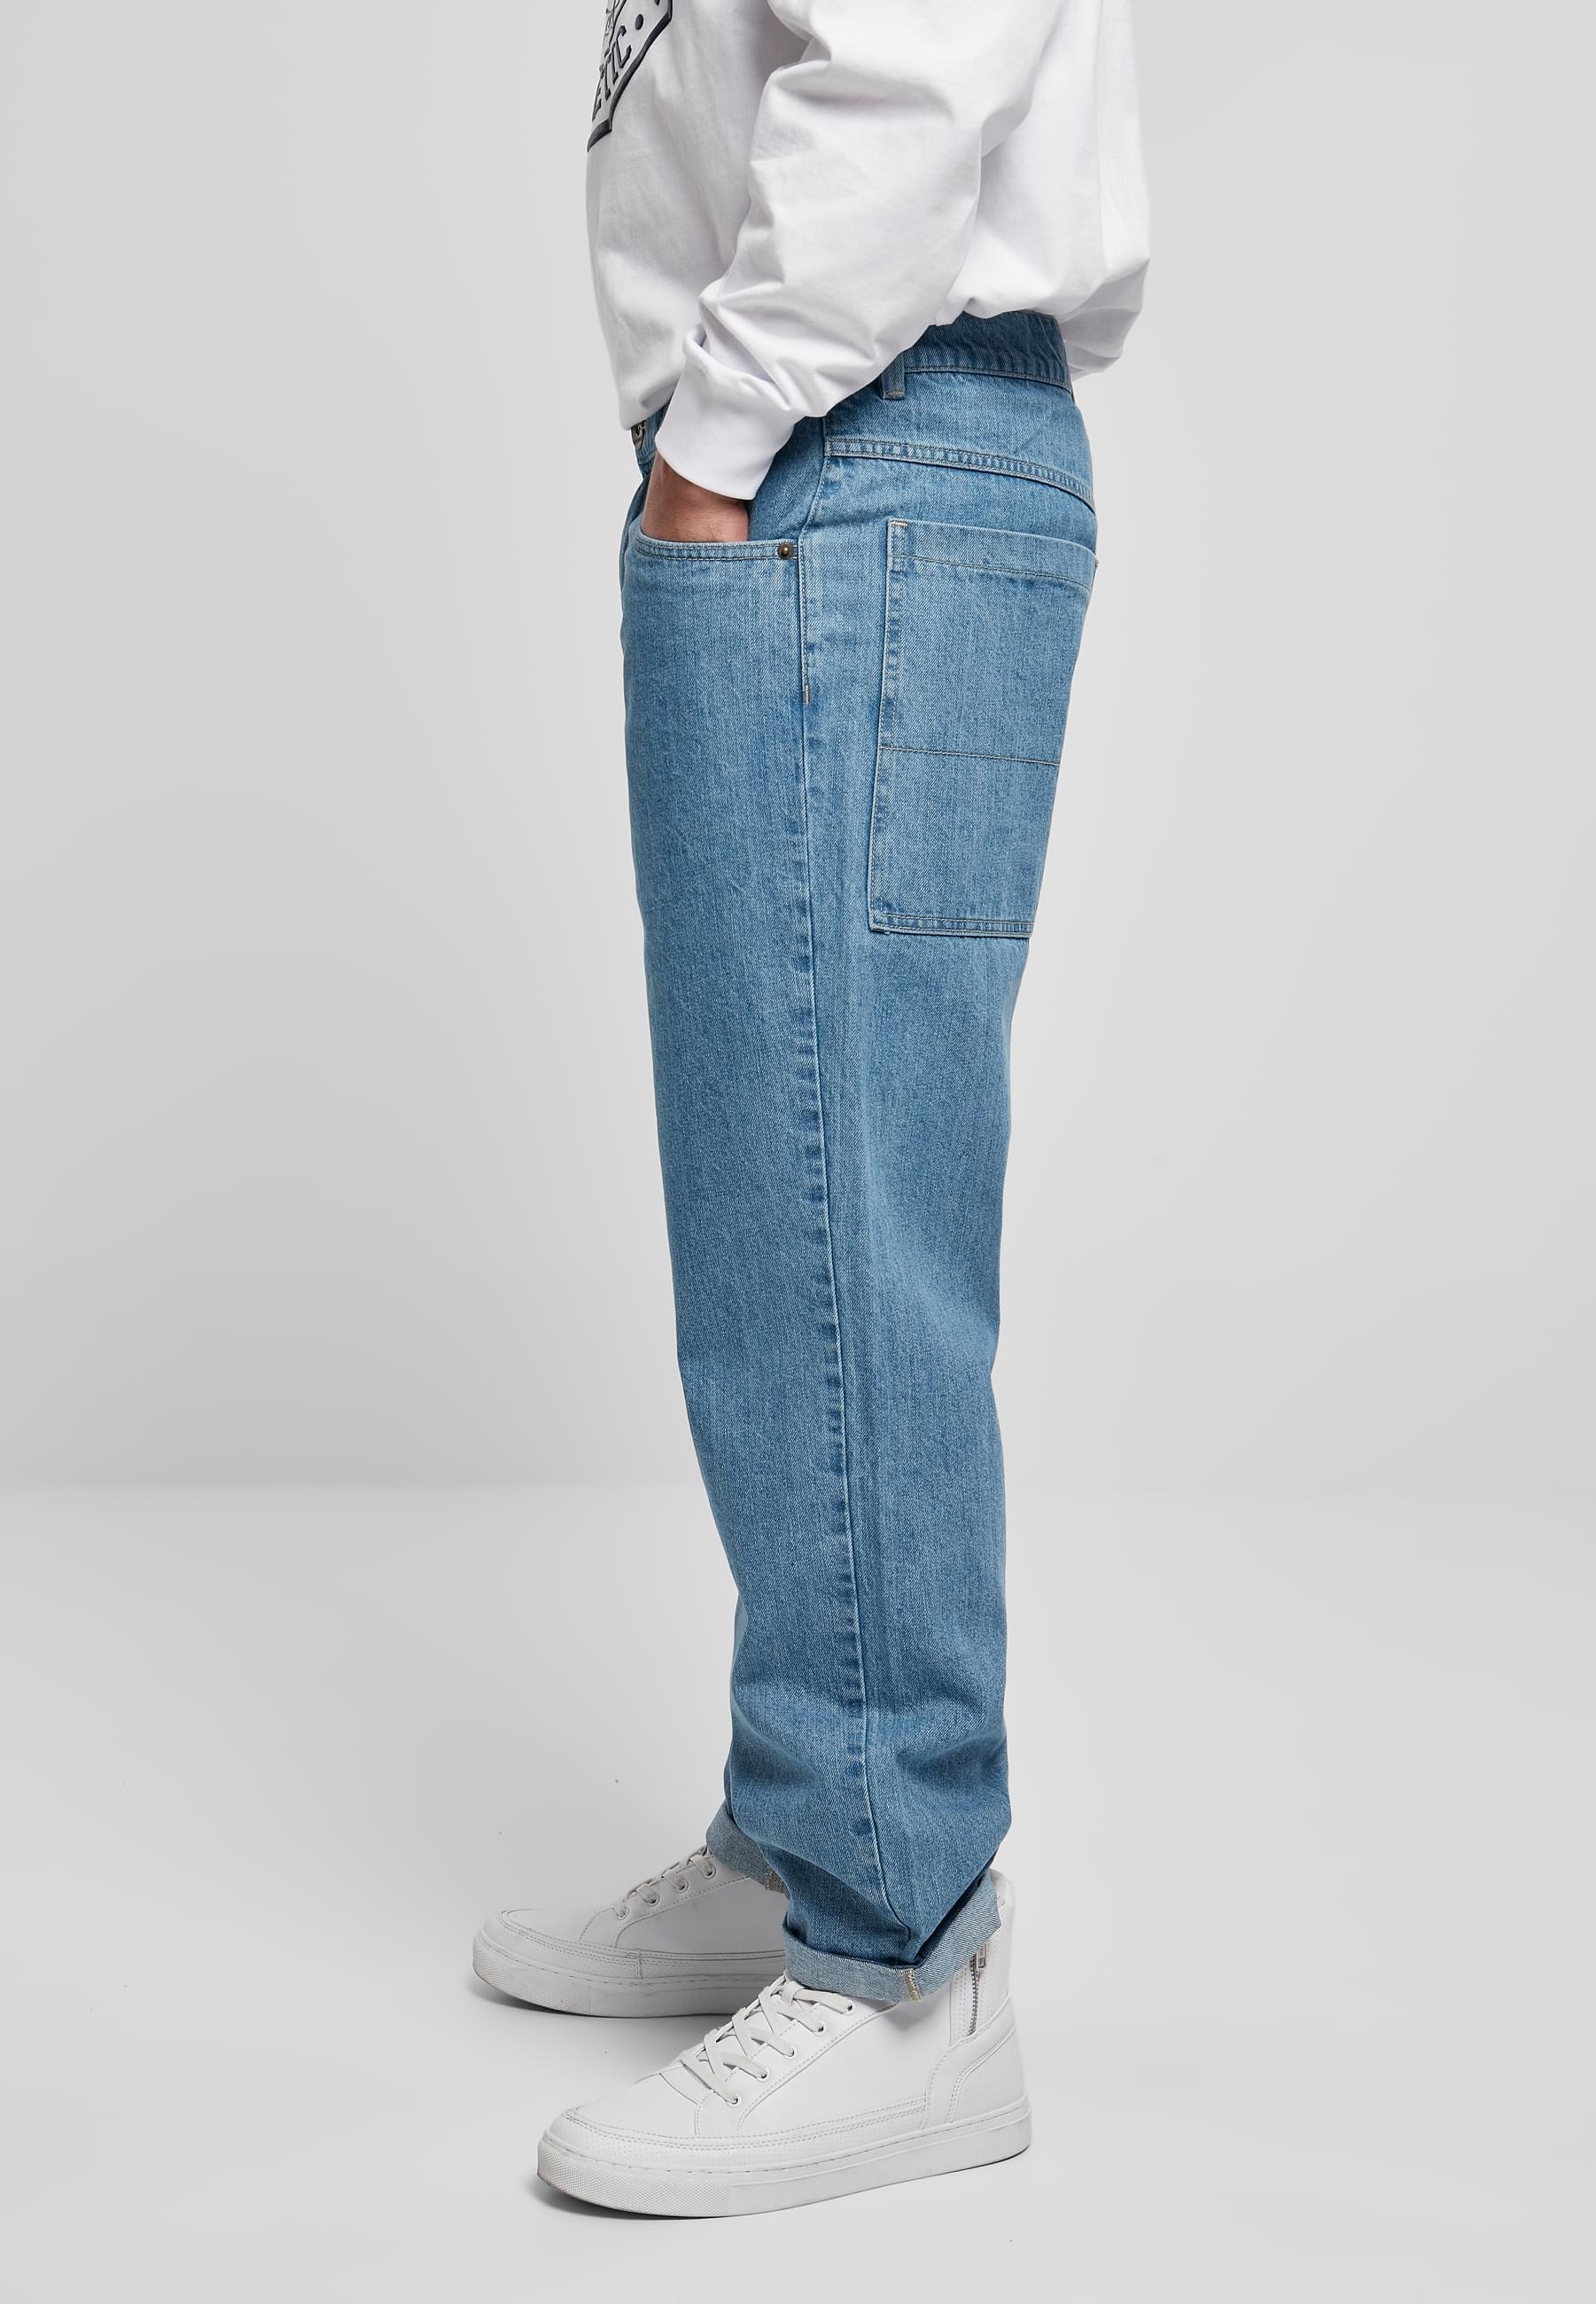 Southpole Bequeme Jeans »Southpole Herren Southpole Embroidery Denim«, (1 tlg.)